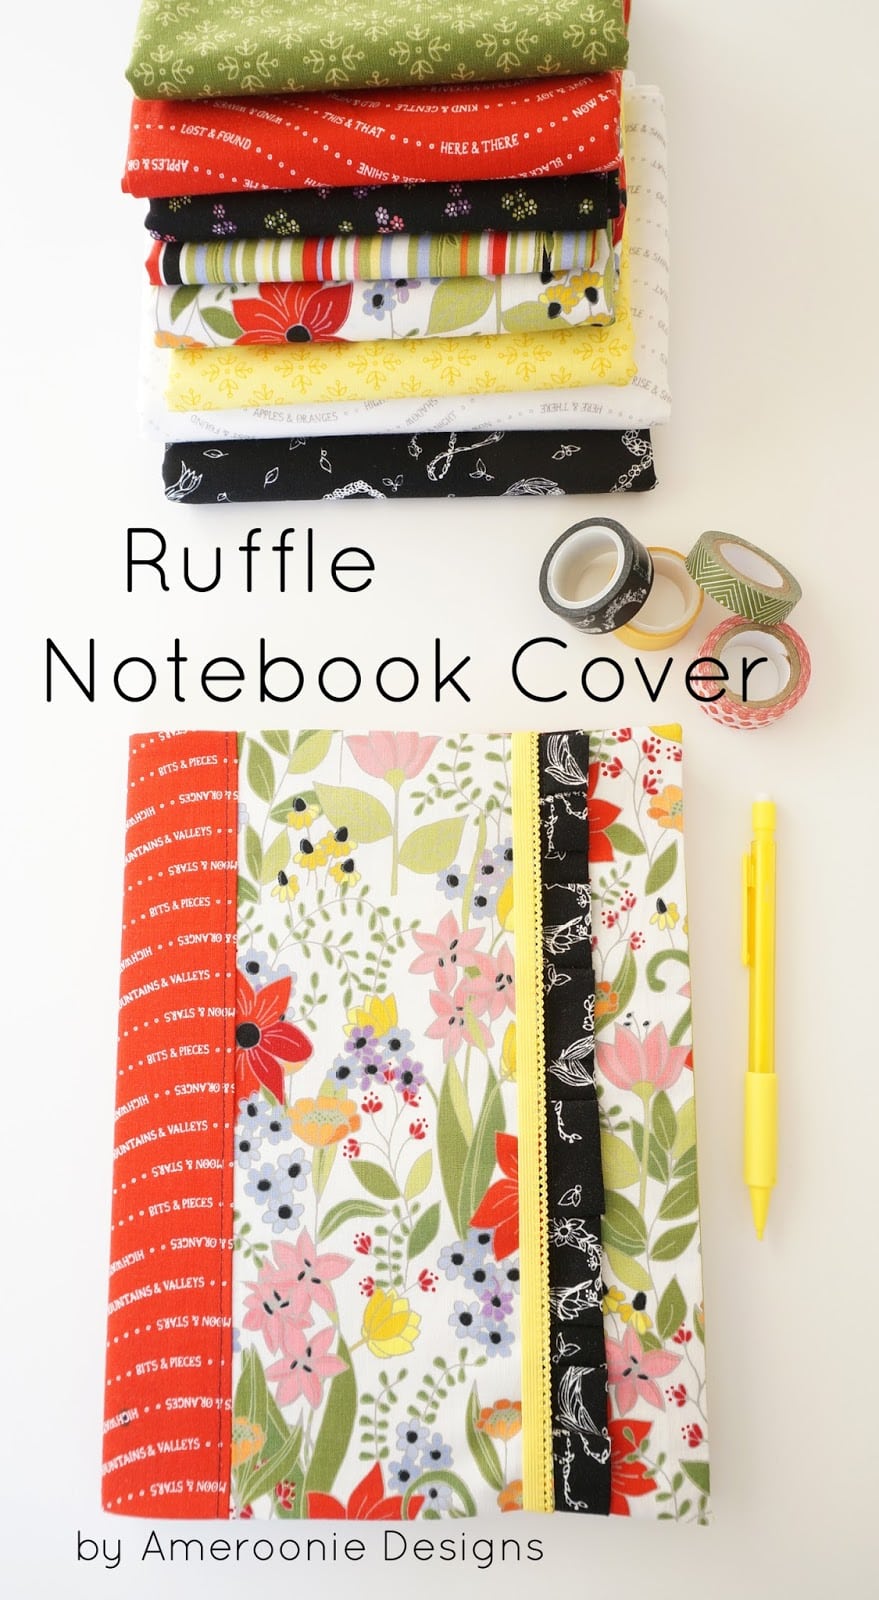 How to make a ruffle notebook cover